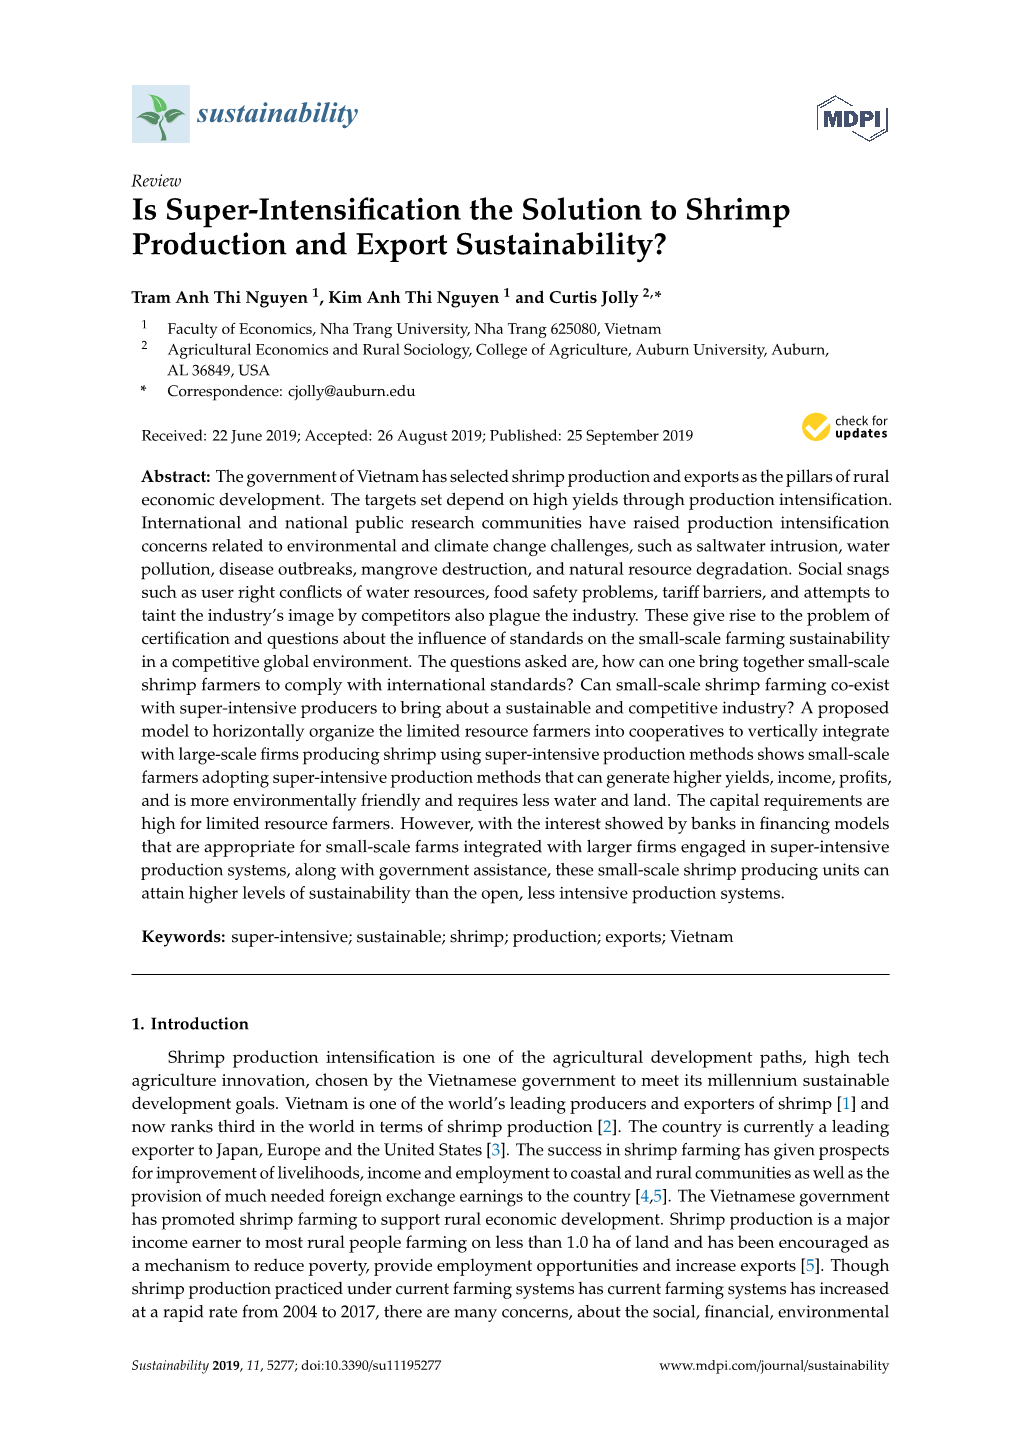 Is Super-Intensification the Solution to Shrimp Production and Export Sustainability?